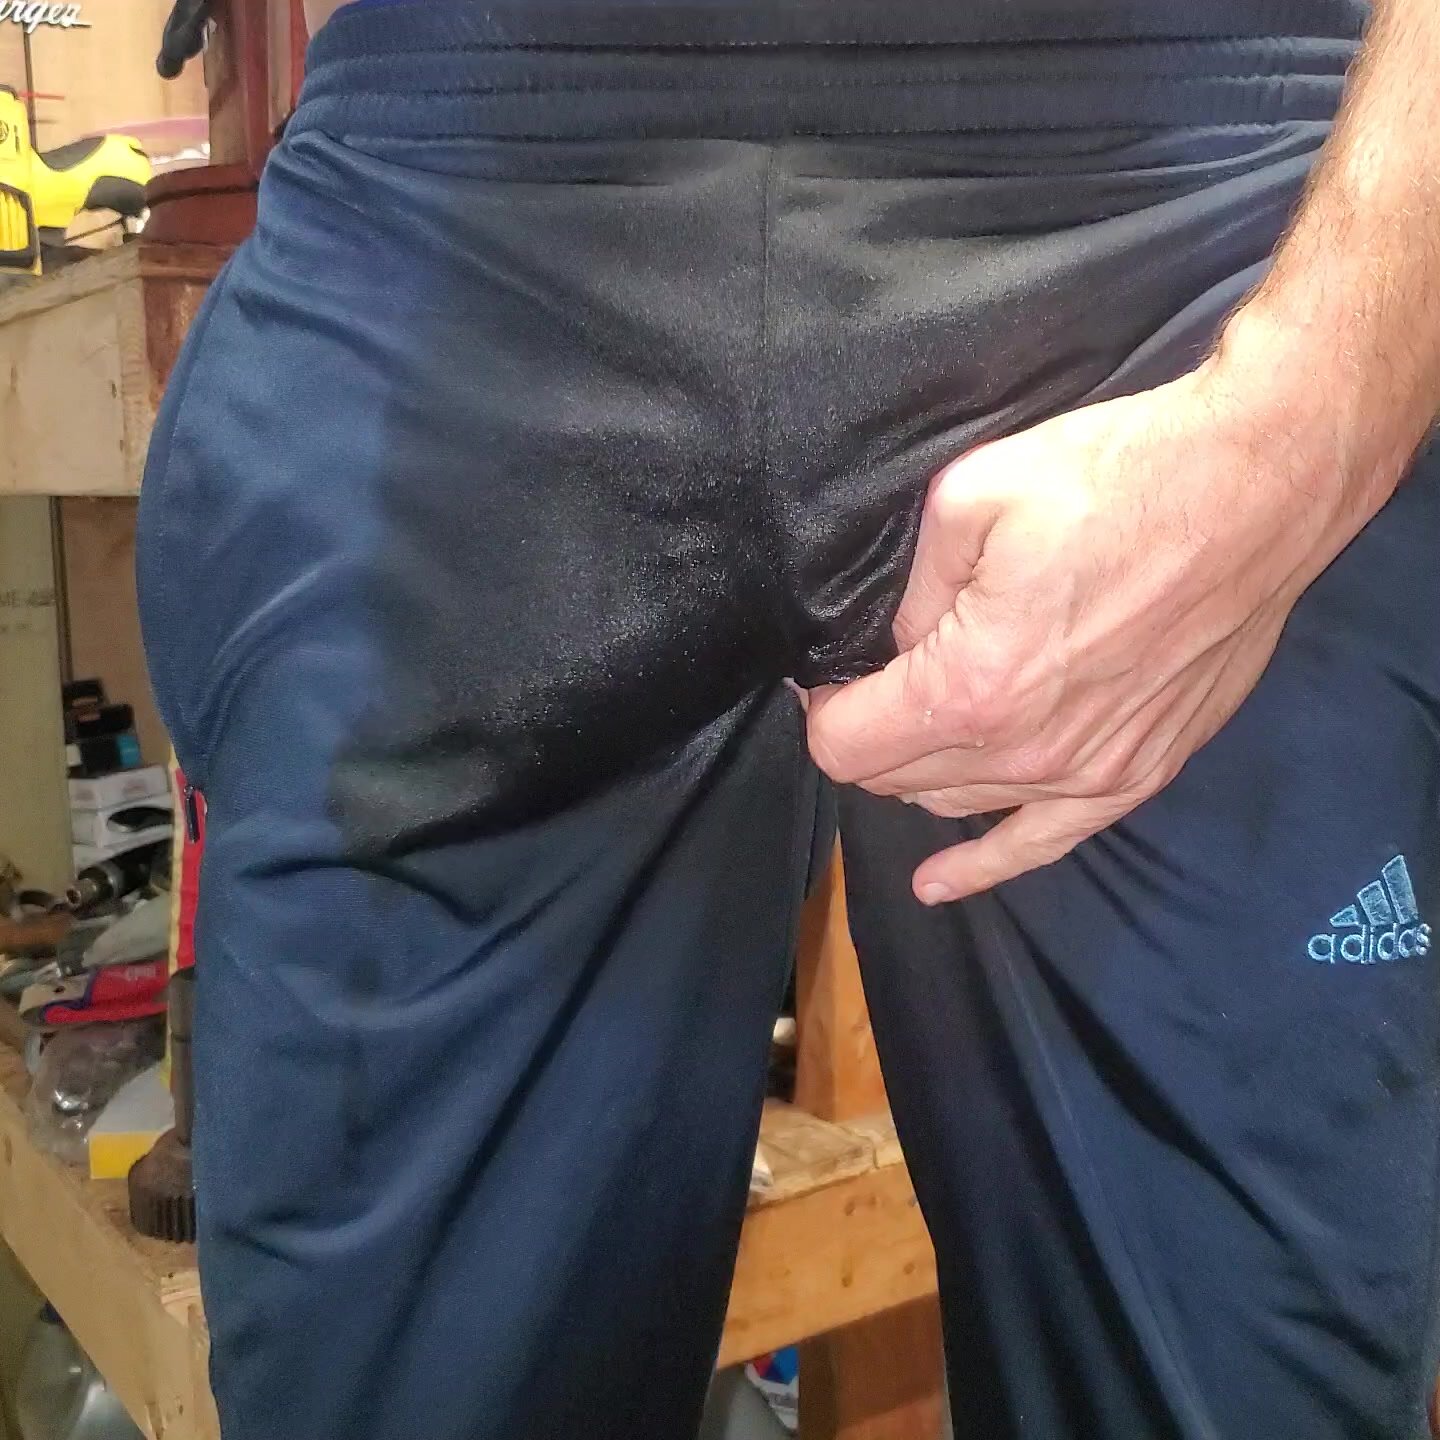 Pissing in adidas trackies